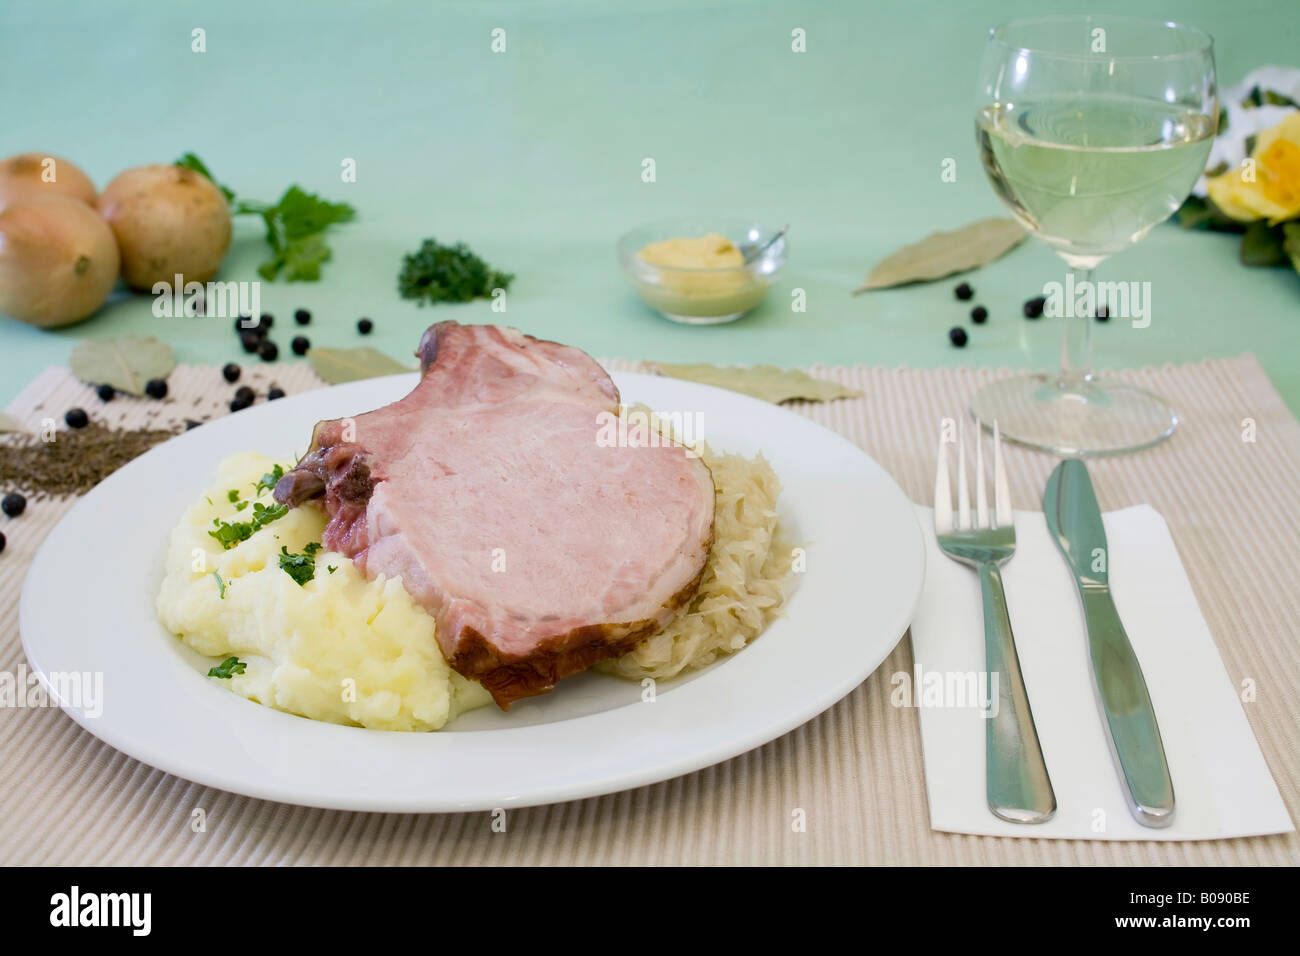 Smoked pork loin with sauerkraut, mashed potatoes and spices served with a glass of white wine Stock Photo